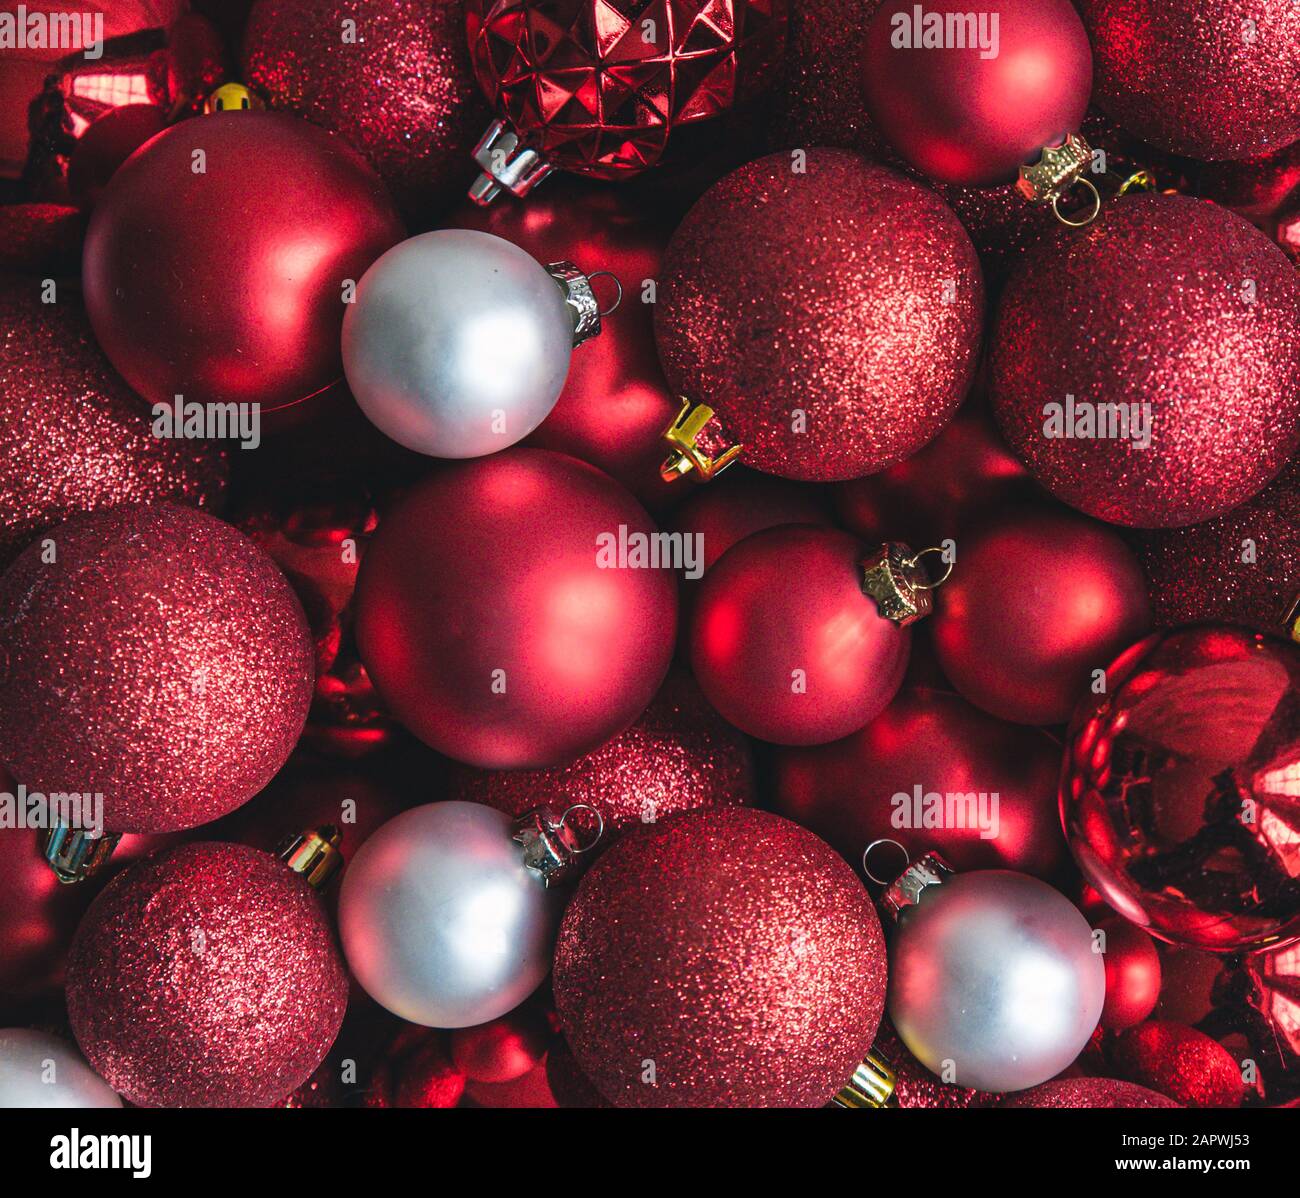 Close up of a variety of red and white christmas ball ornaments. Stock Photo